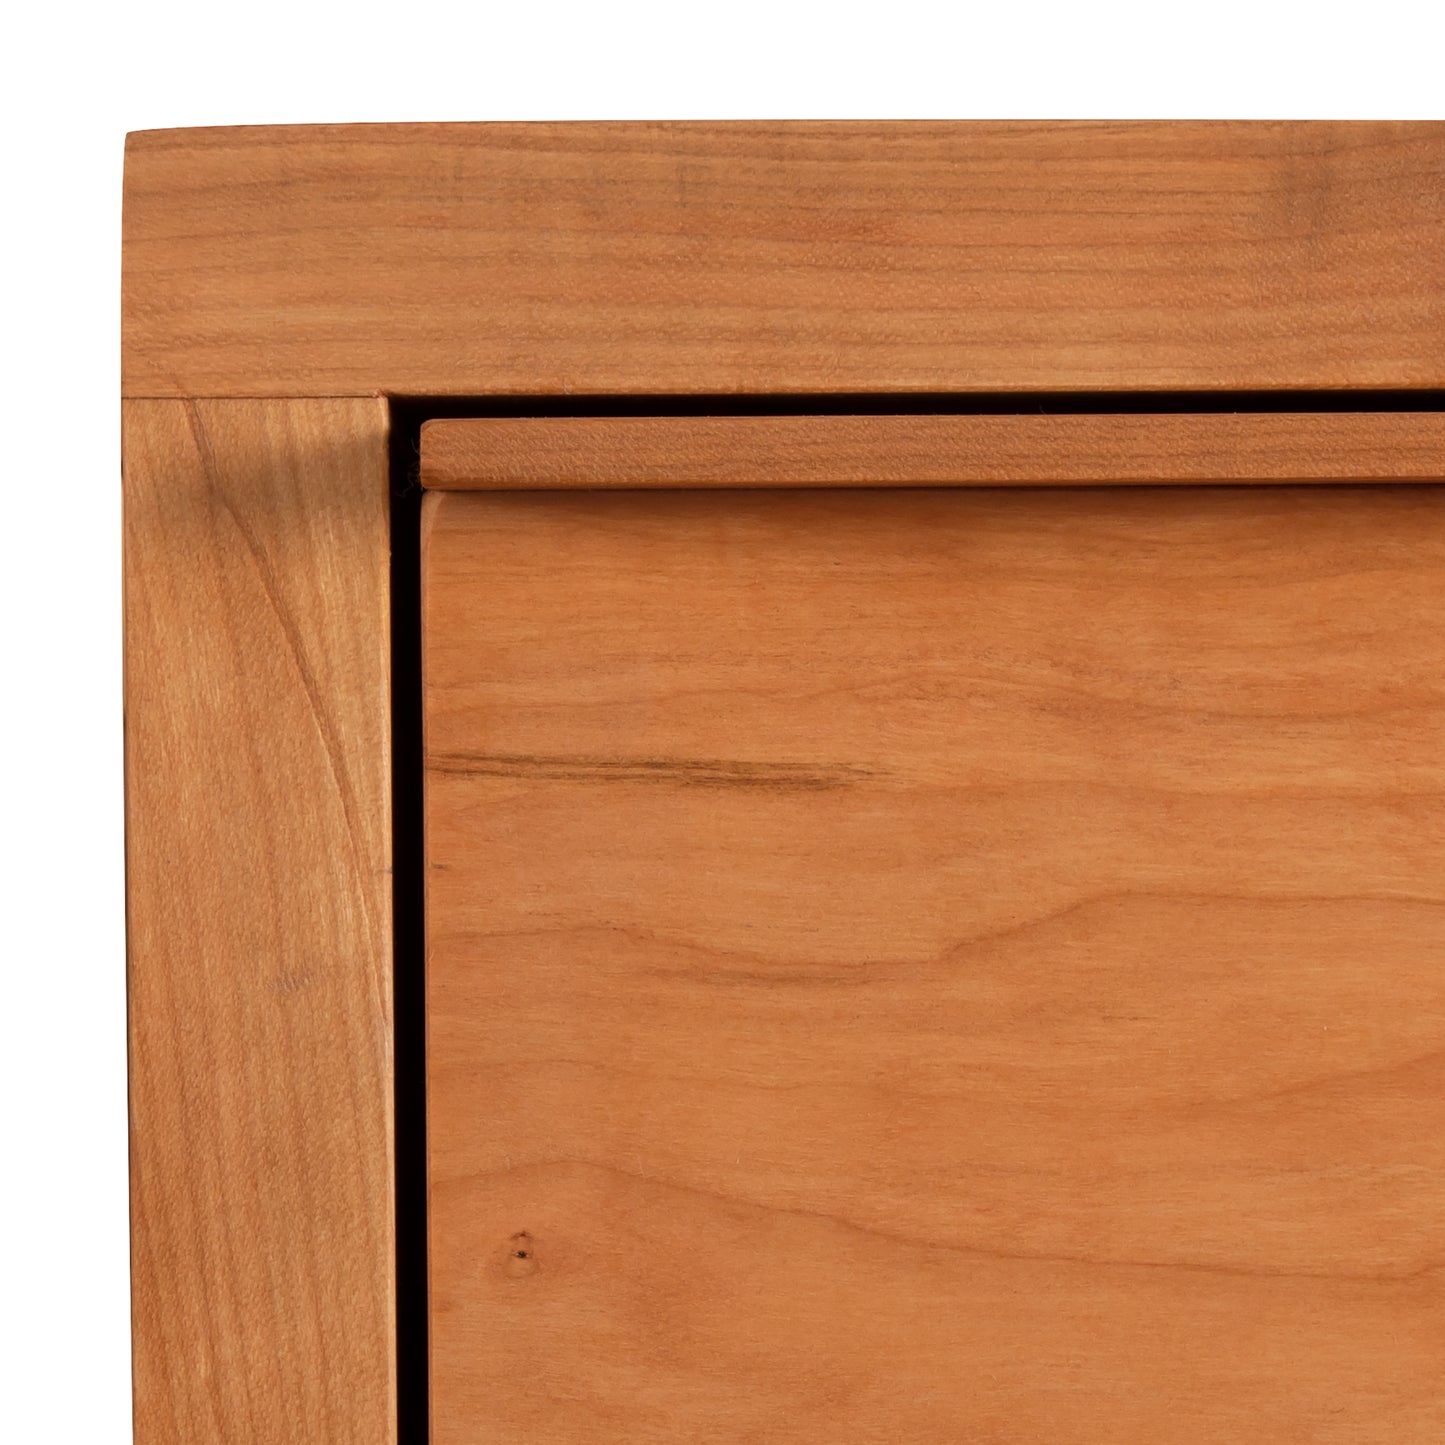 Close-up view of a Vermont Furniture Designs Kipling 3-Drawer Nightstand corner showing the grain and joint work in natural cherry.